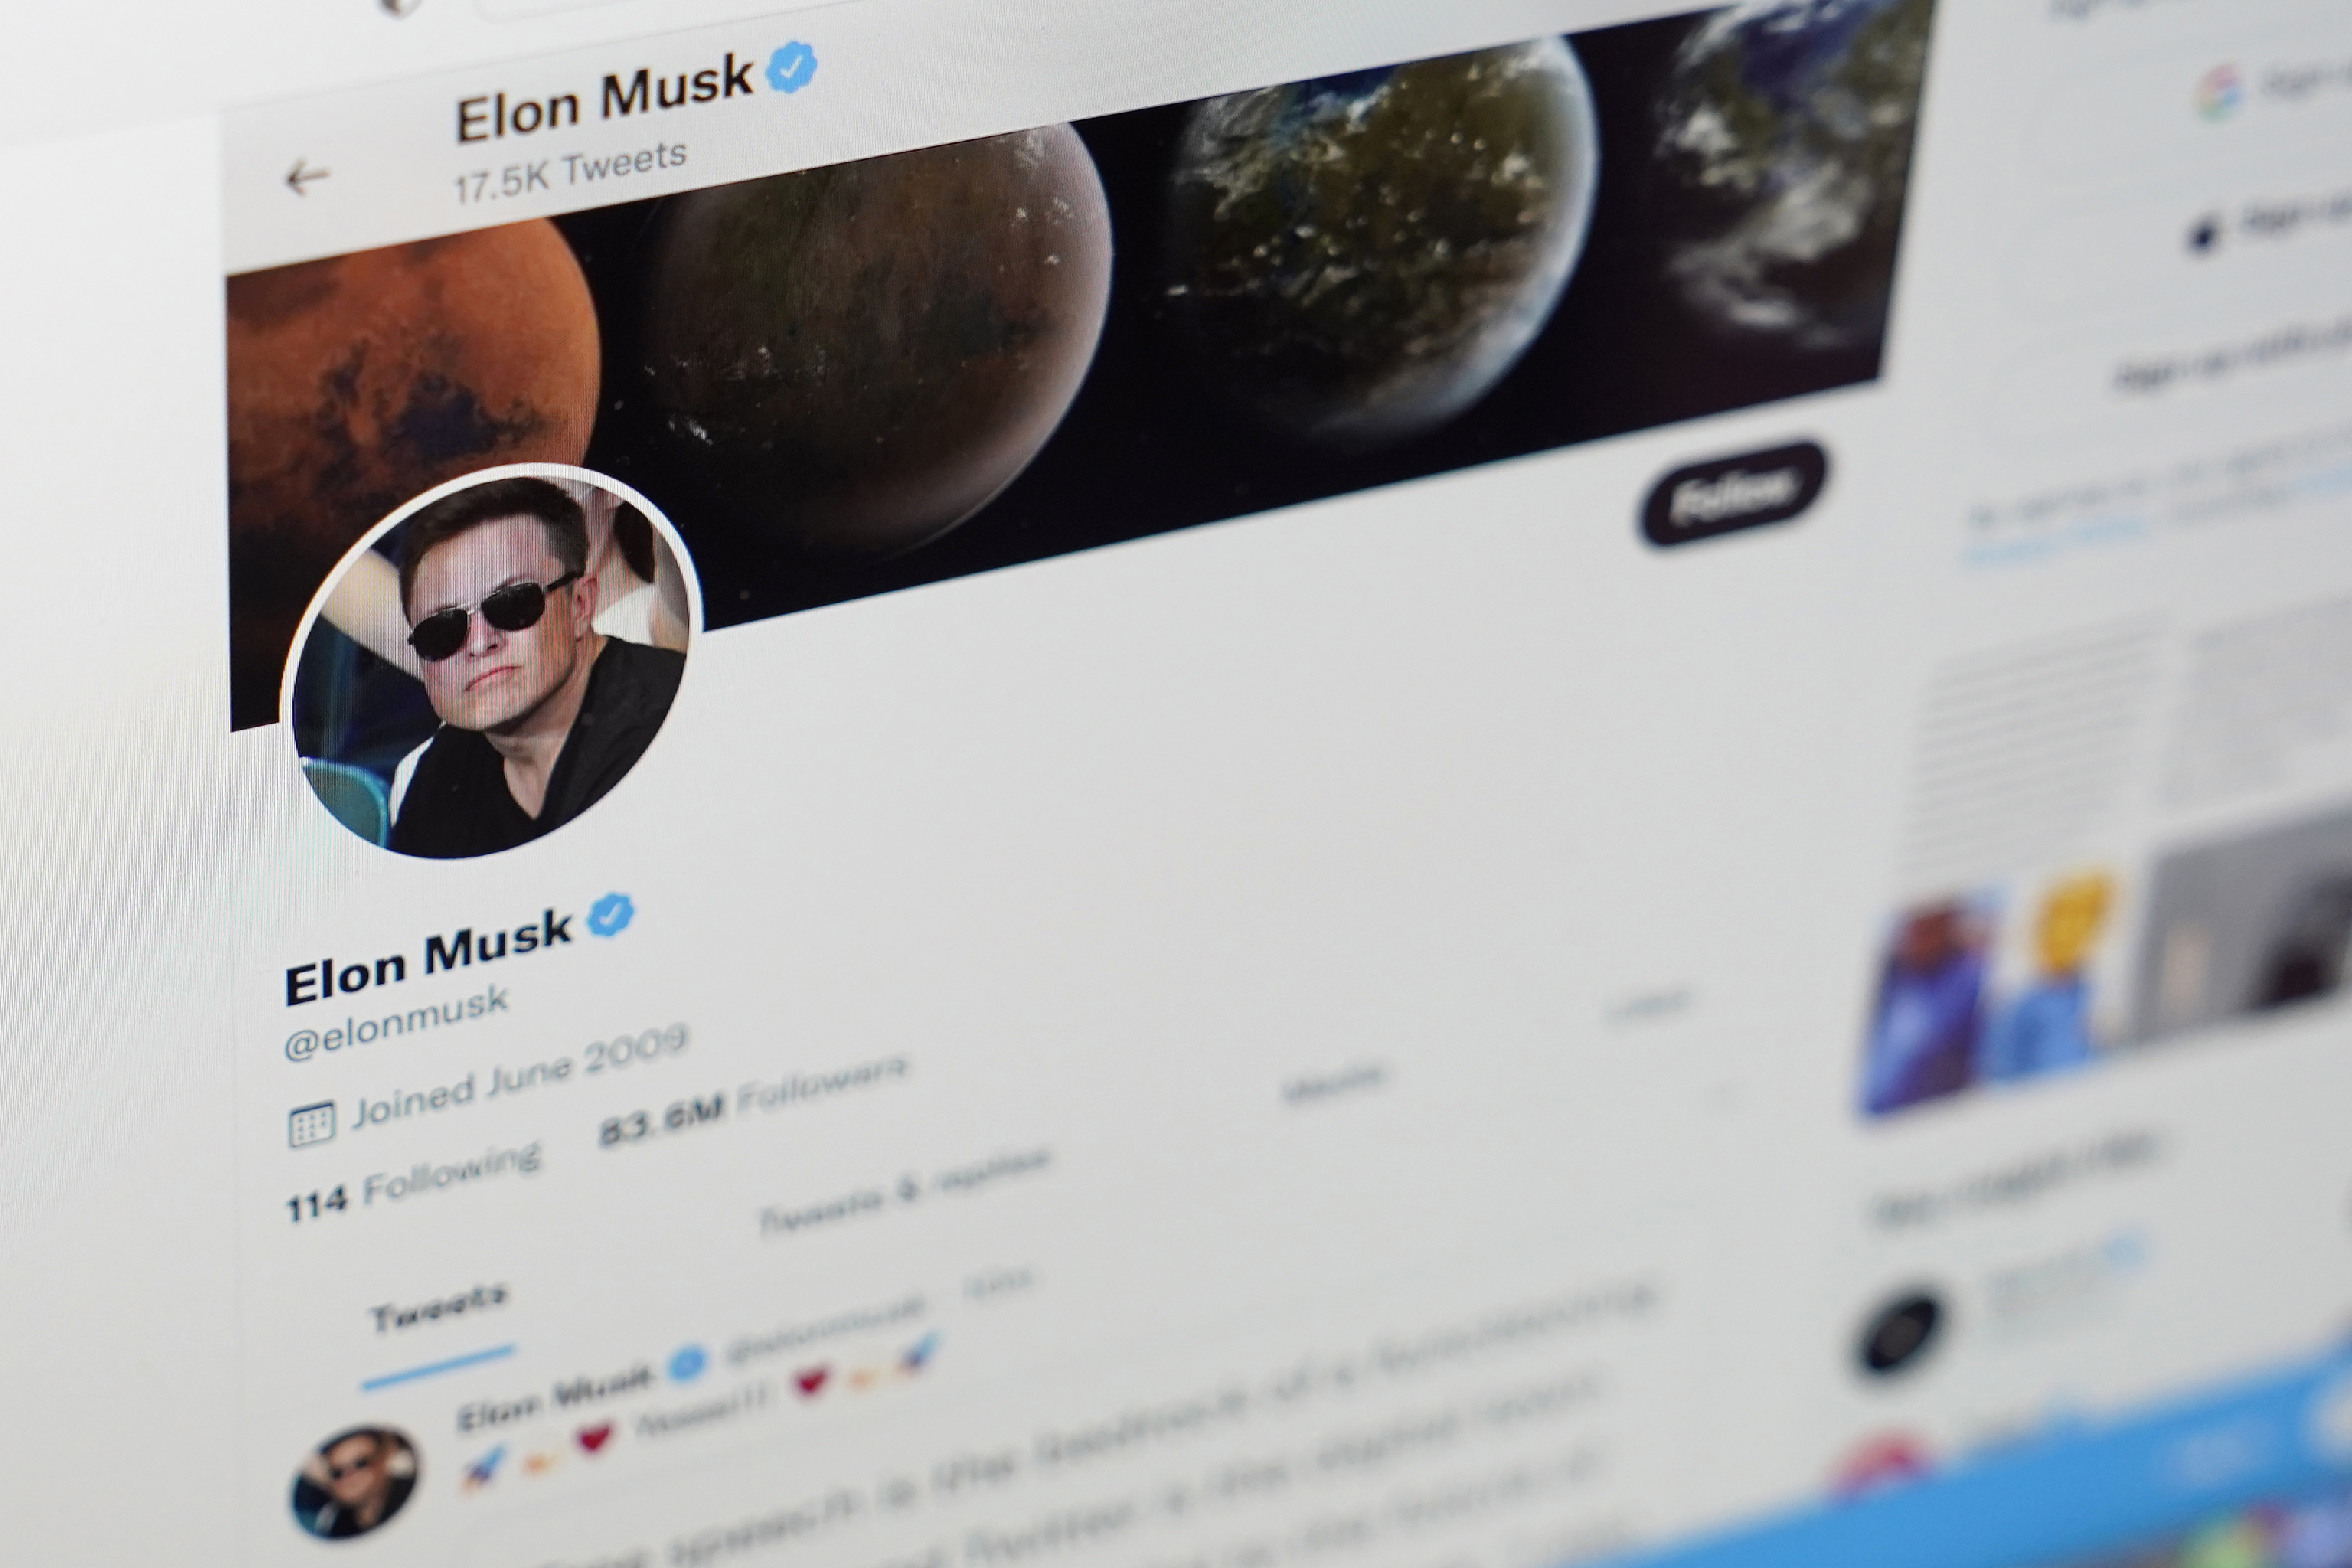 Archive image of Elon Musk's Twitter account.